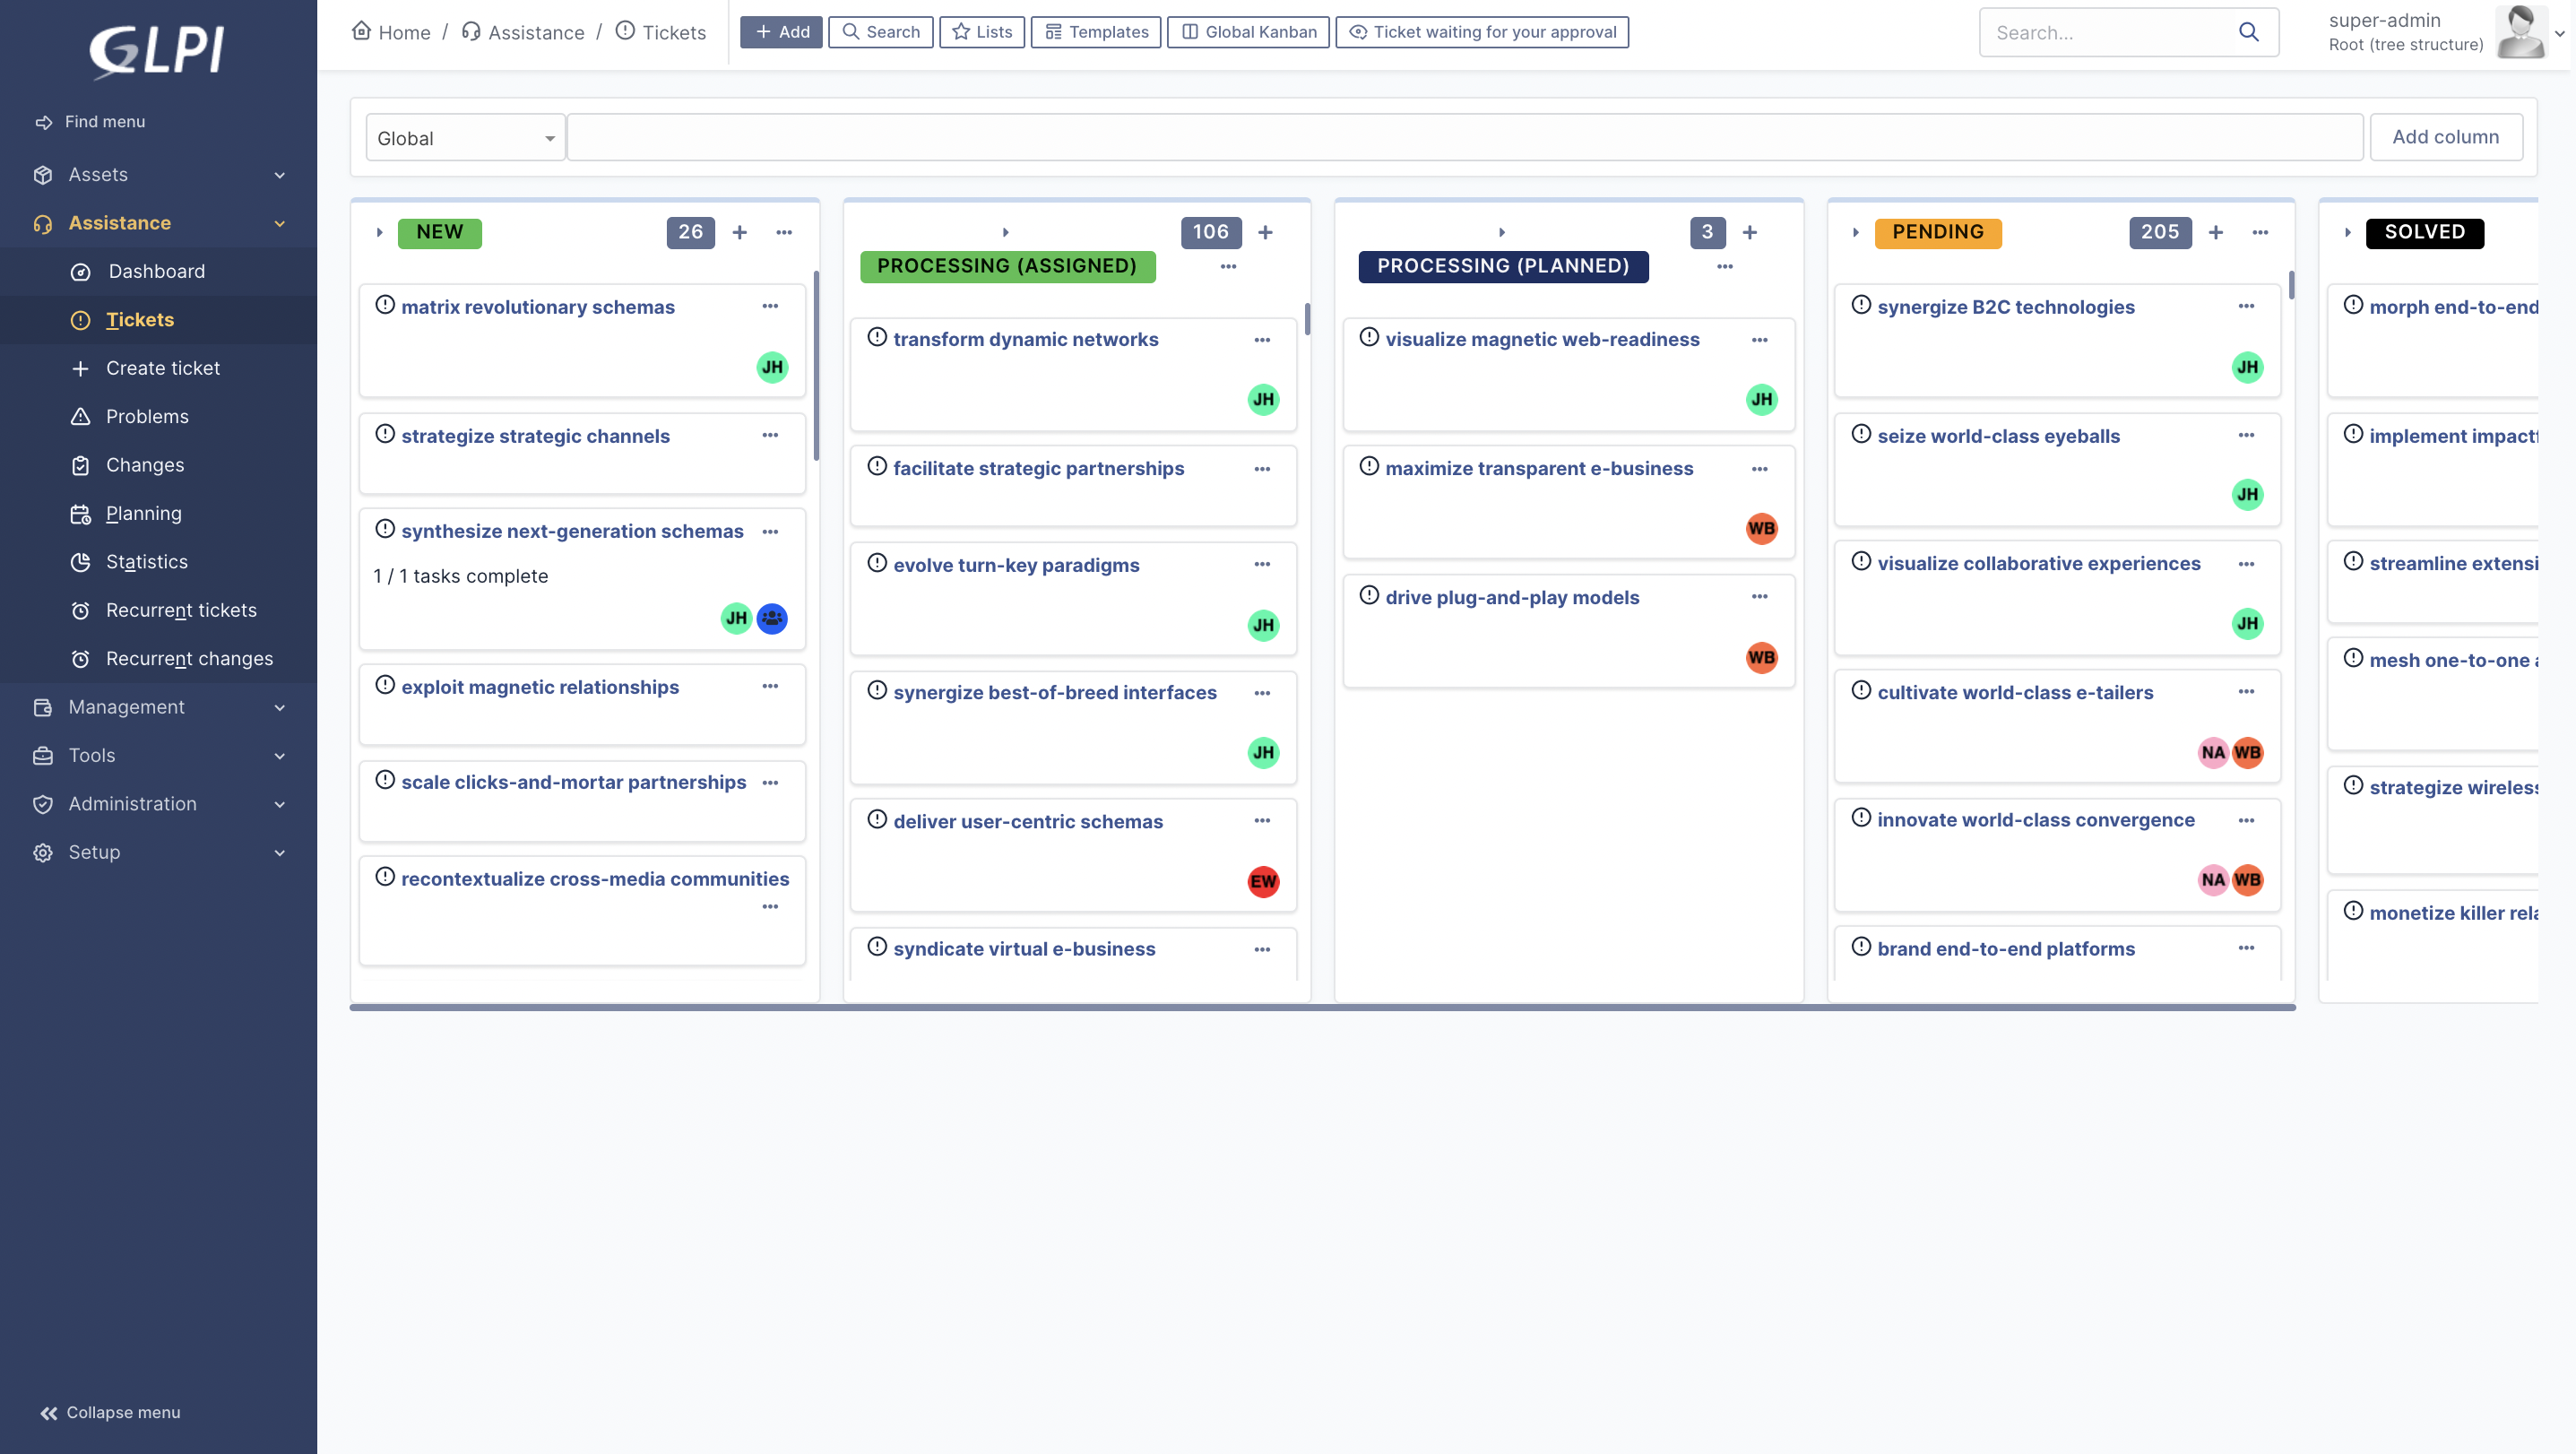 Kanban view for ITIL objects